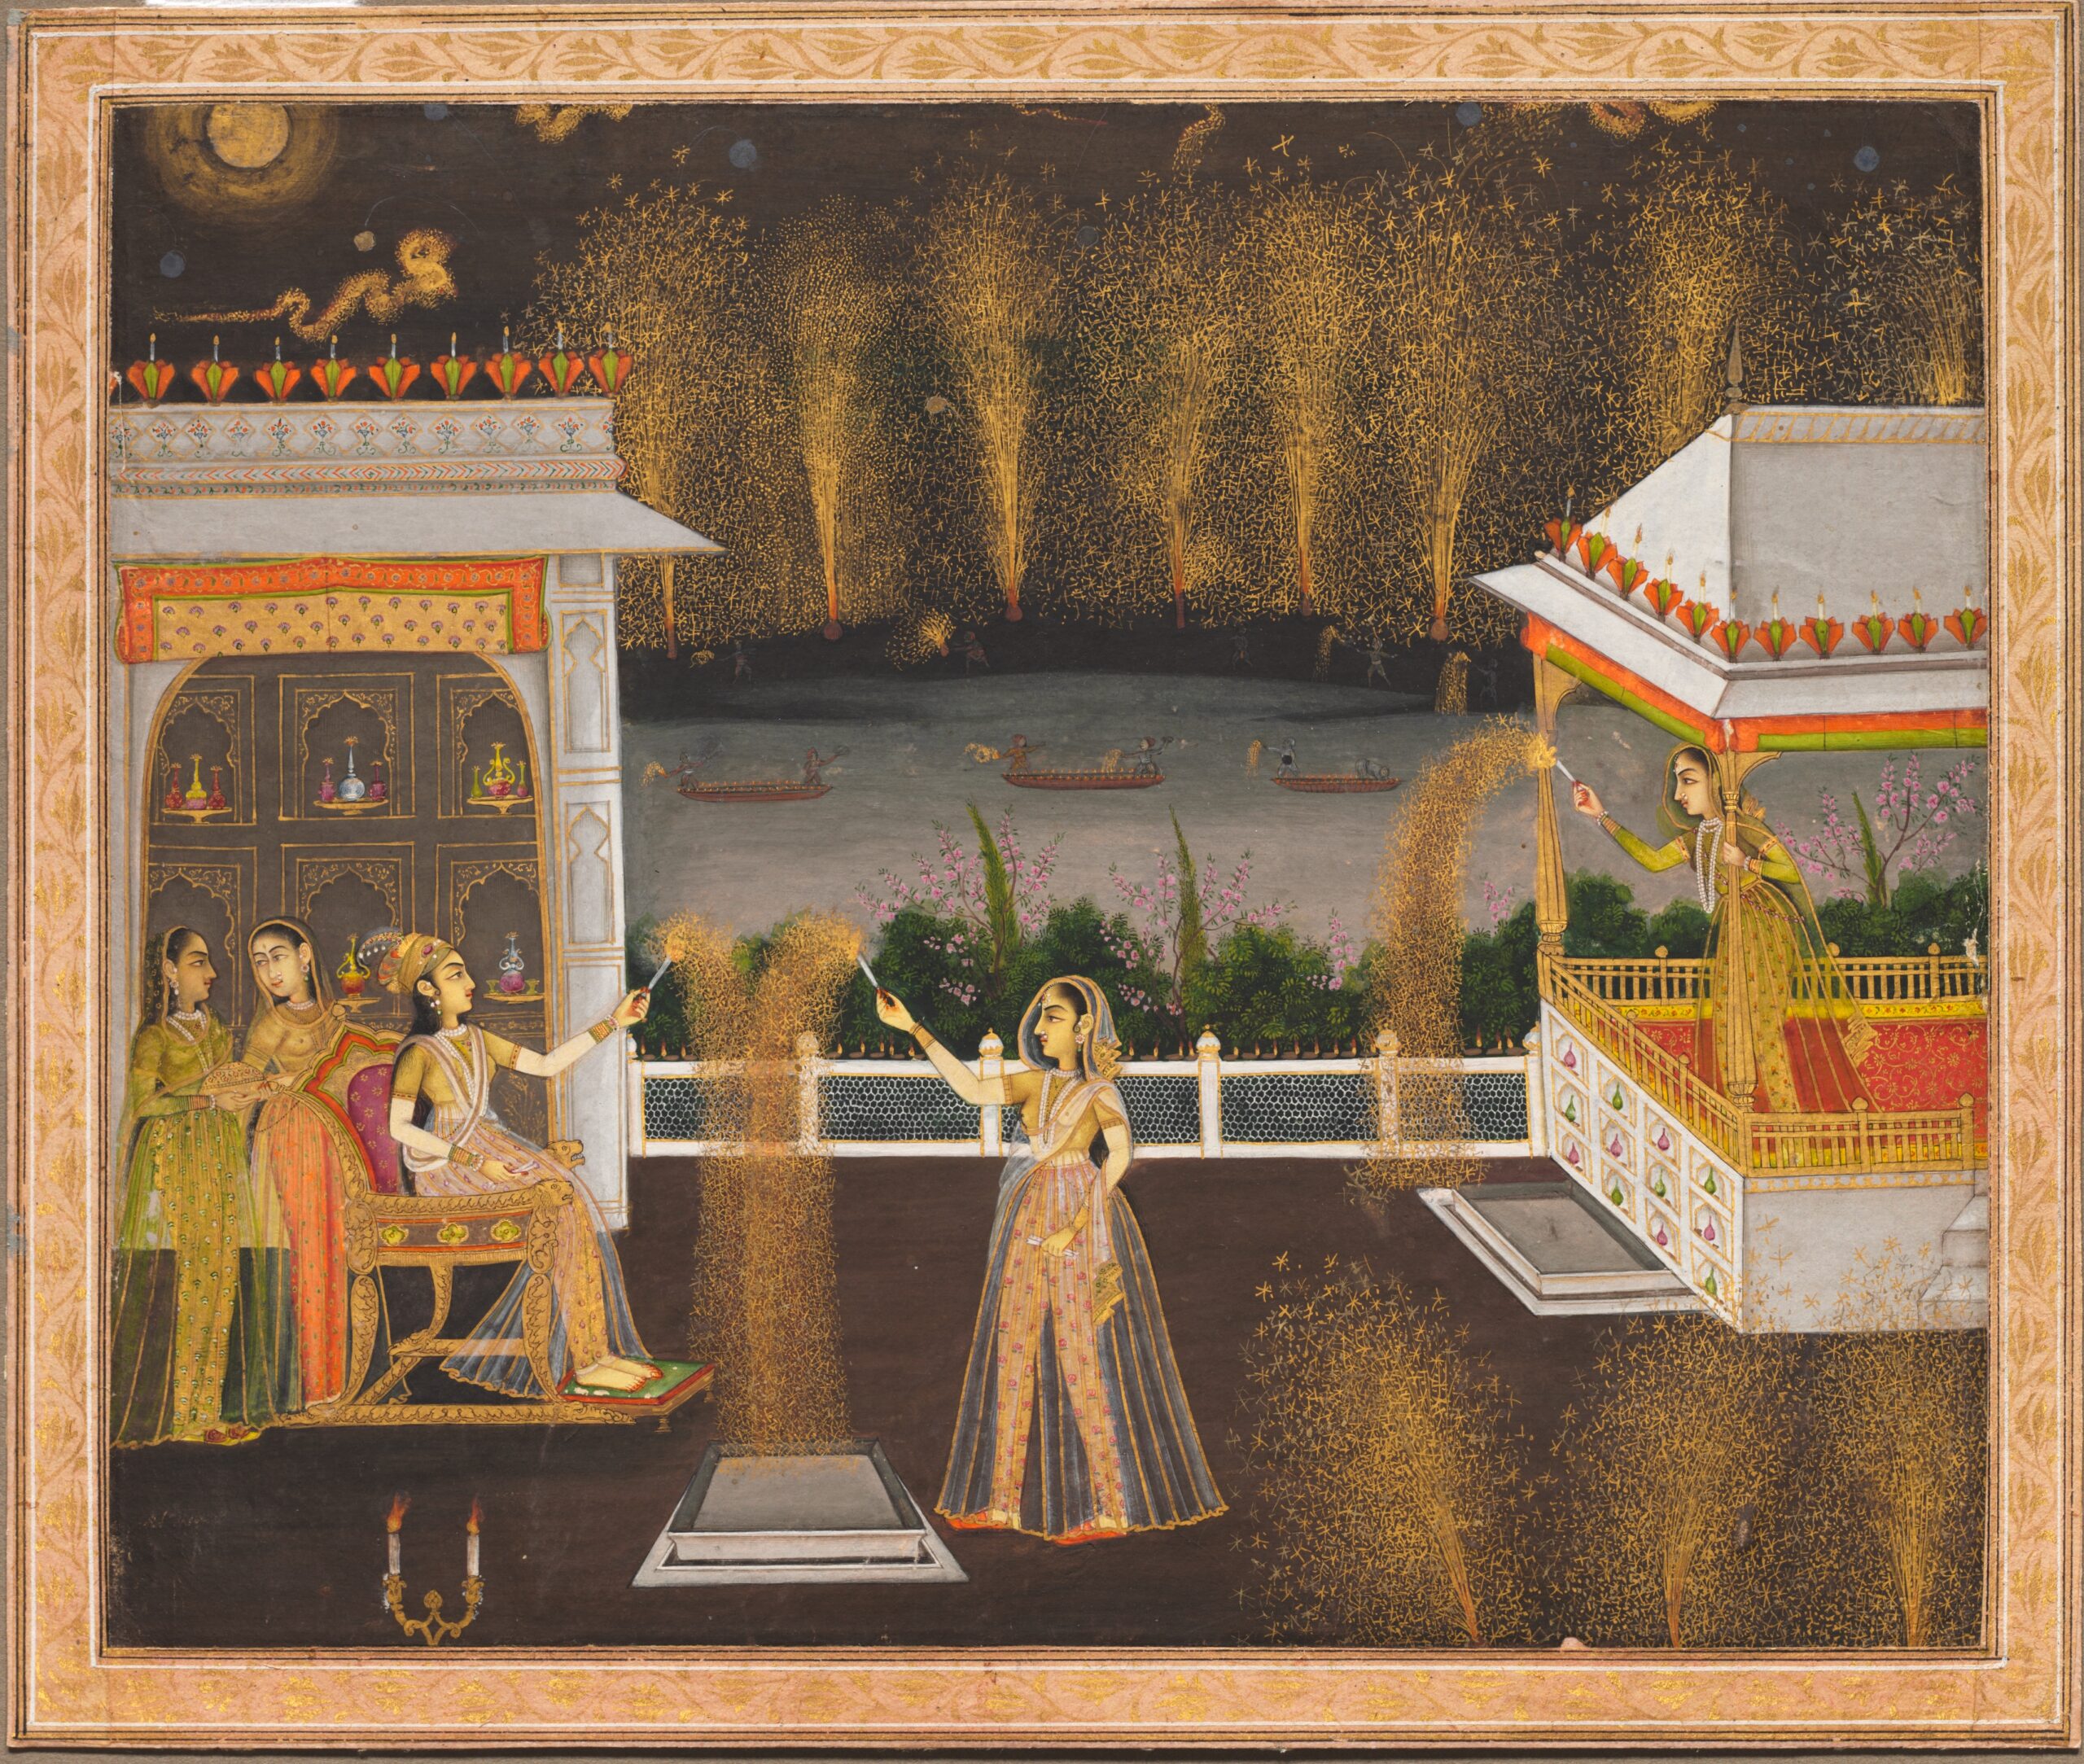 fireworks in Indian art